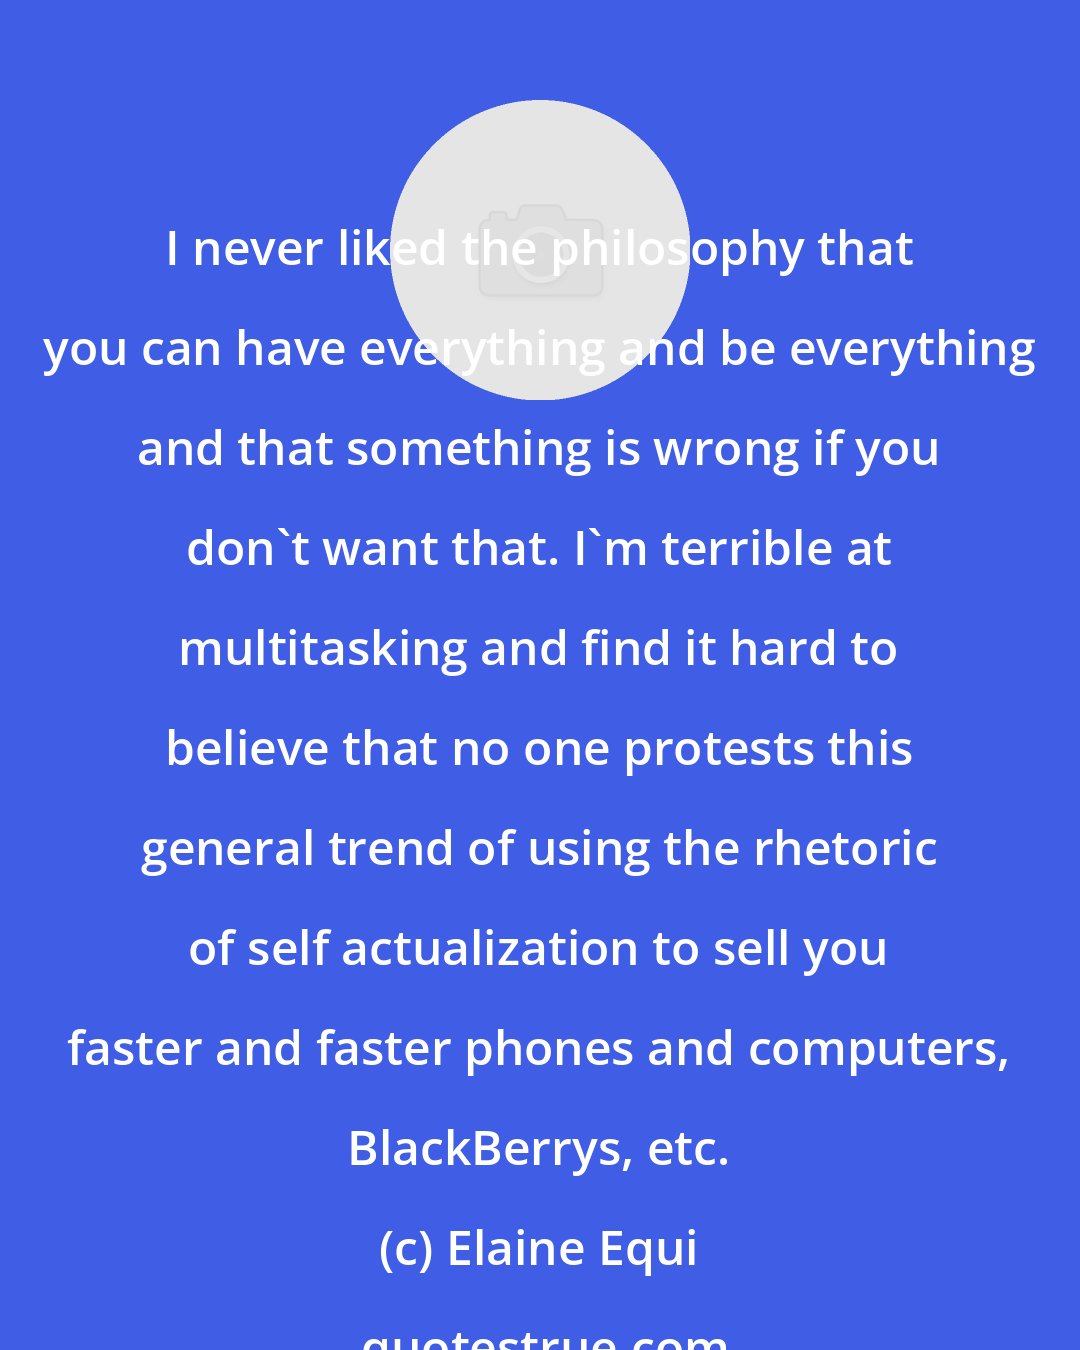 Elaine Equi: I never liked the philosophy that you can have everything and be everything and that something is wrong if you don't want that. I'm terrible at multitasking and find it hard to believe that no one protests this general trend of using the rhetoric of self actualization to sell you faster and faster phones and computers, BlackBerrys, etc.